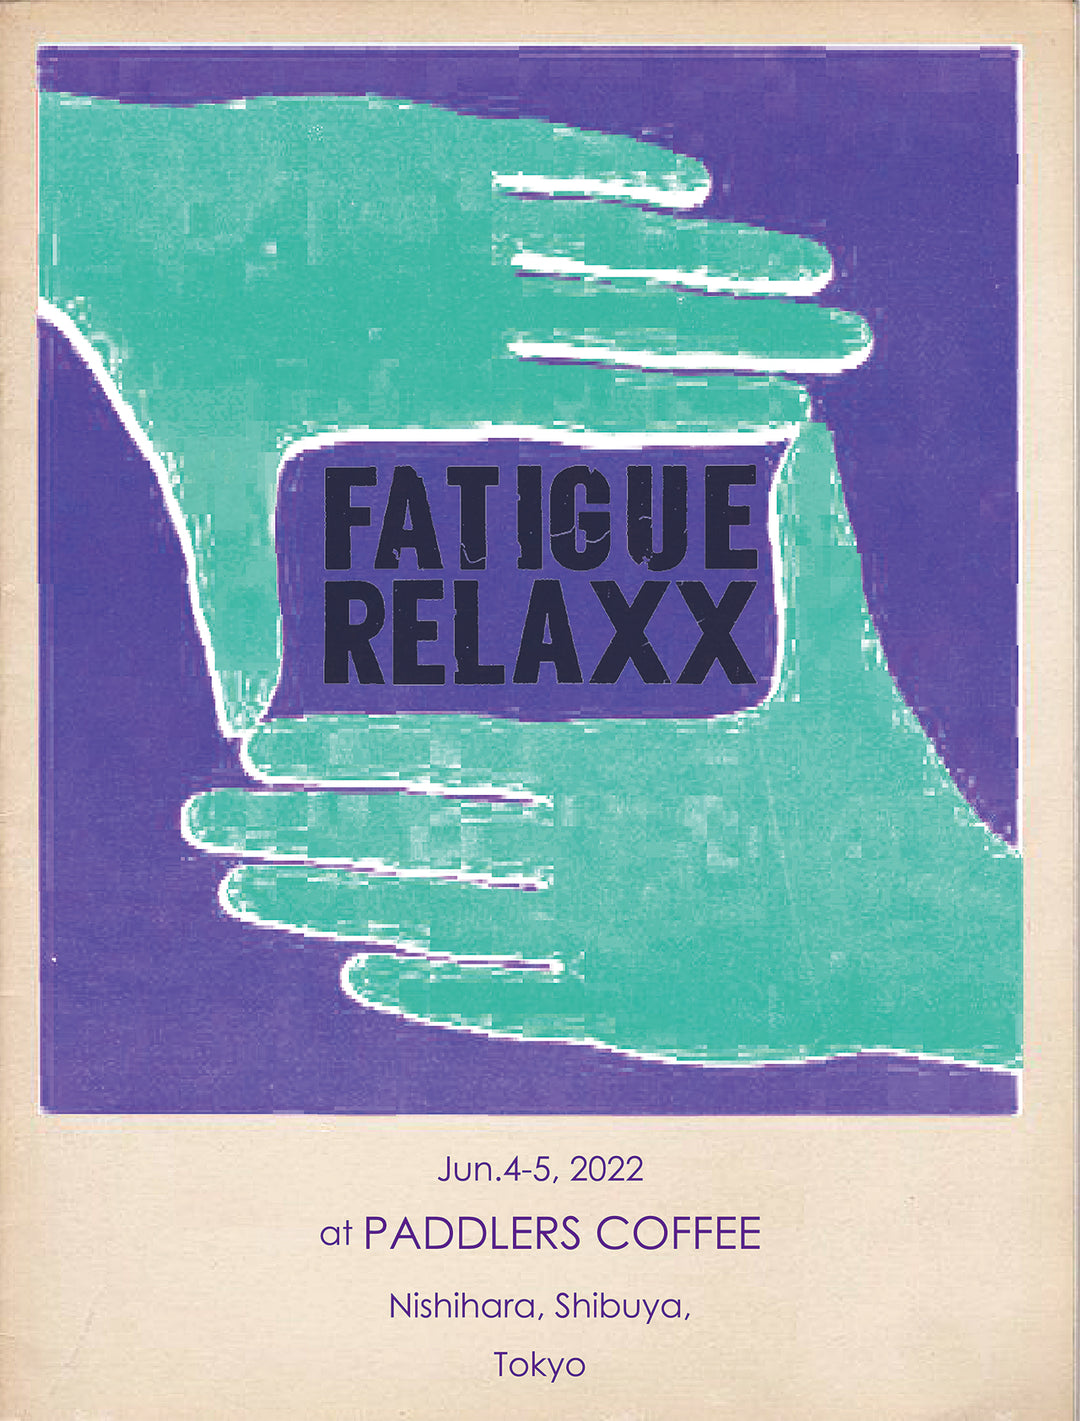 FATIGUE RELAX at PADDLERS COFFEE